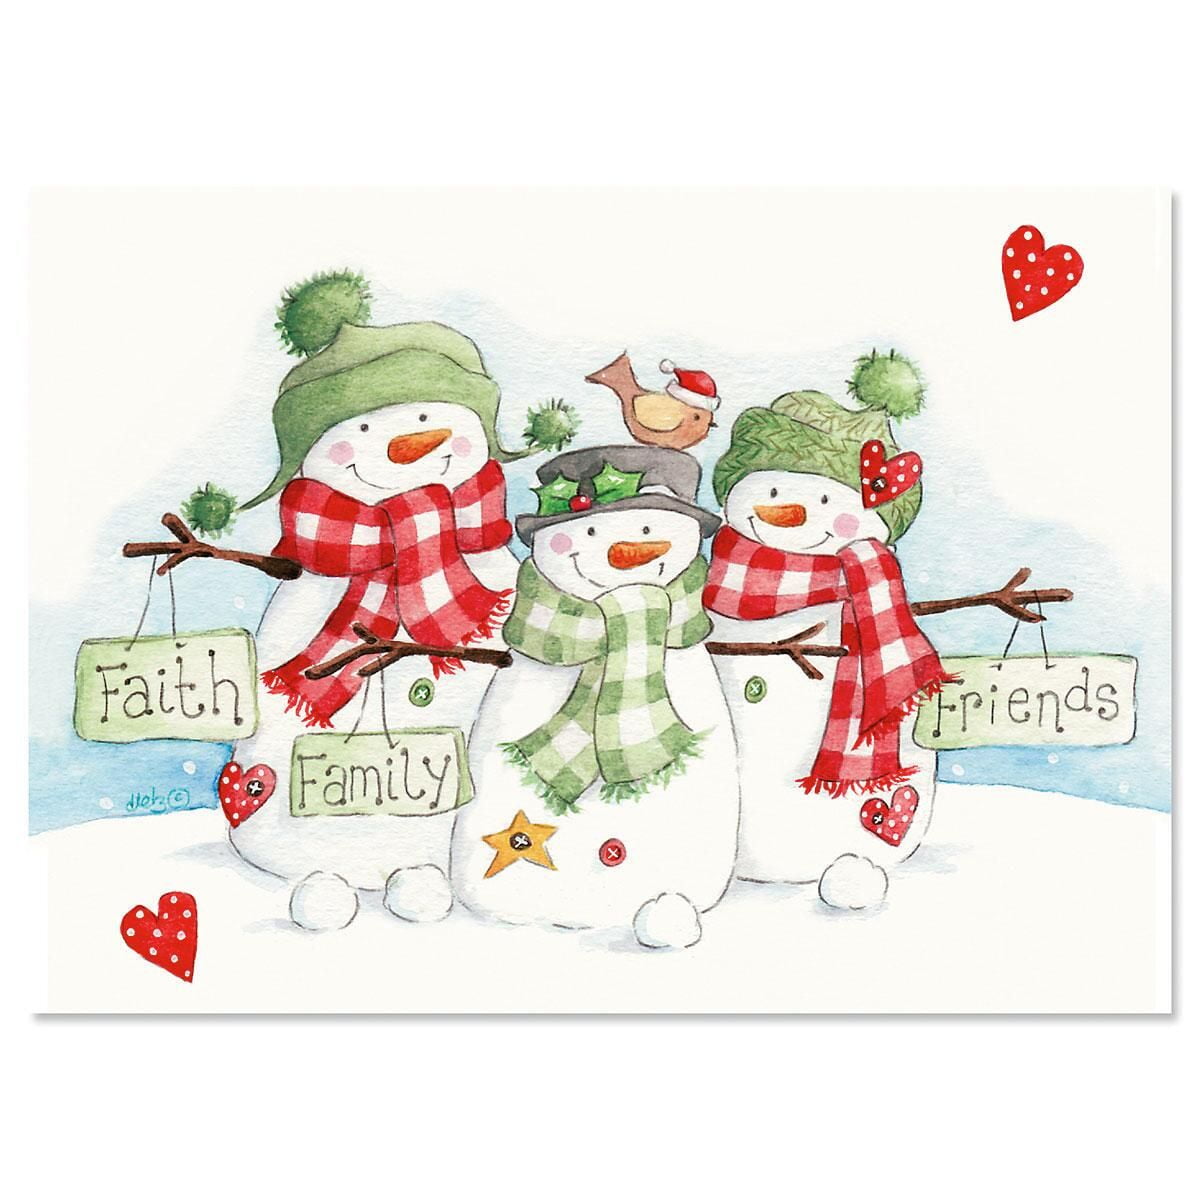 Christmas cards set with 5 greeting cards and envelopes Hand-drawn Christmas cards with illustrations